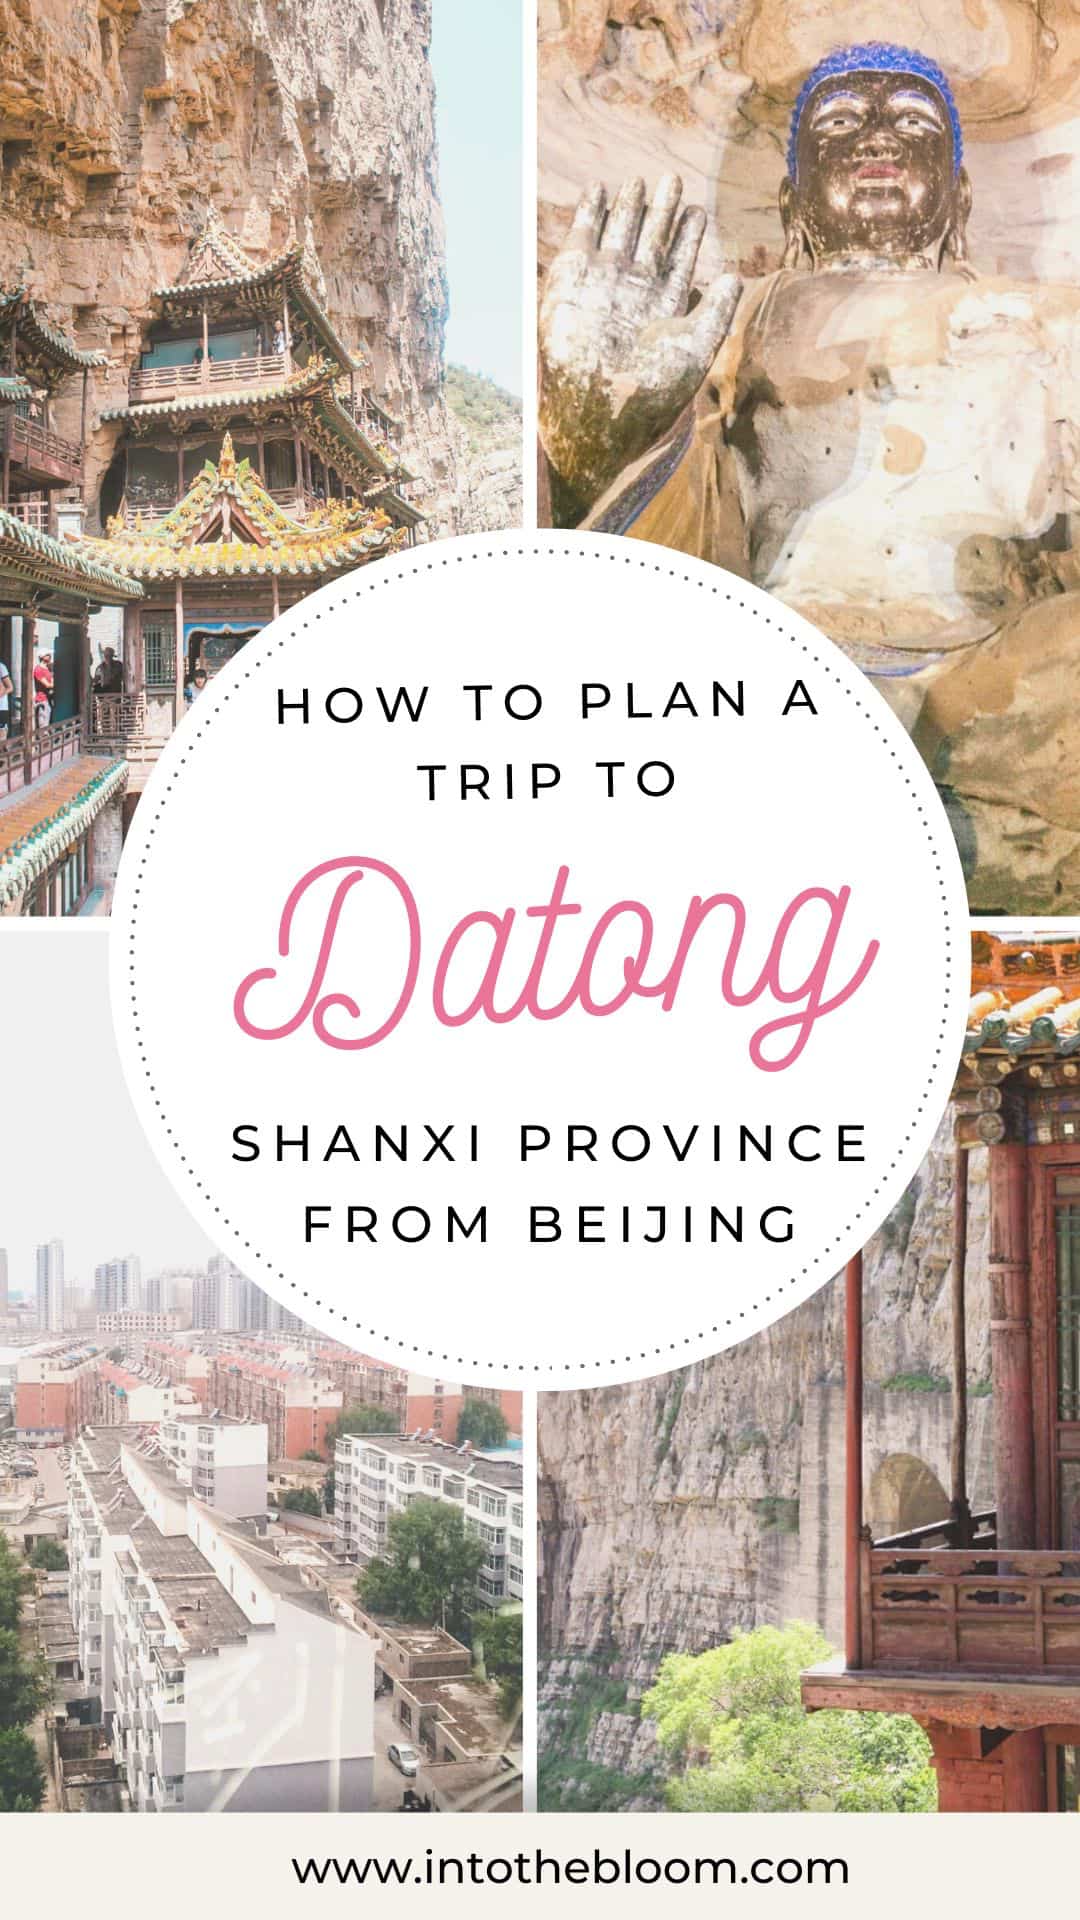 How to plan a trip to Datong, Shanxi province from Beijing - Best things to do in Datong